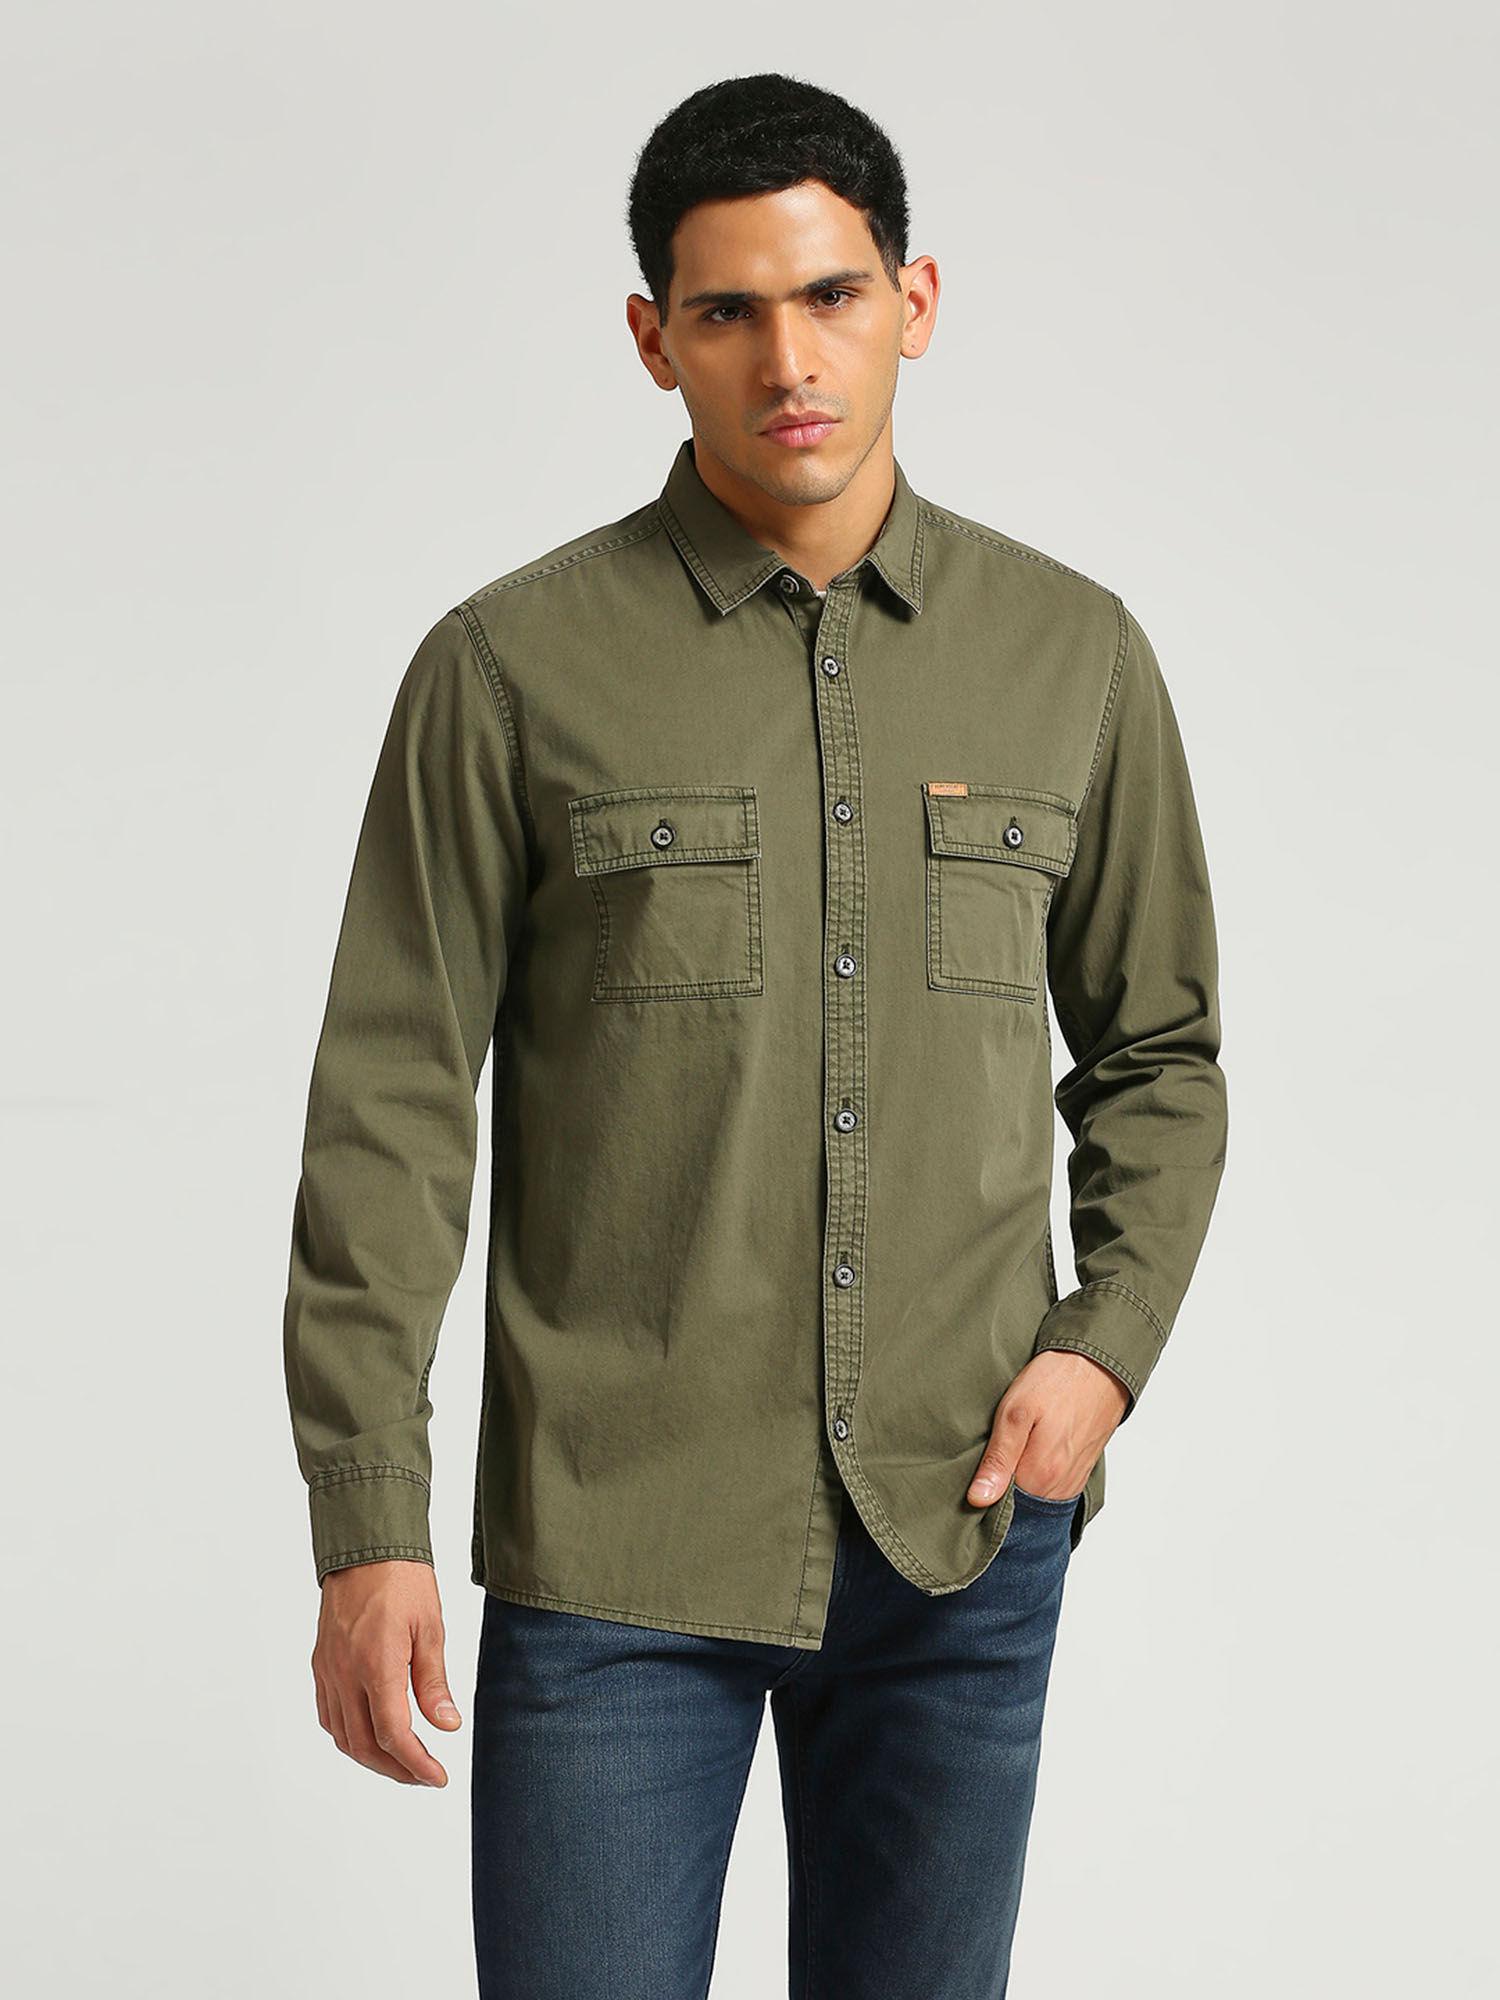 dept-solid-over-dye-twill-shirt